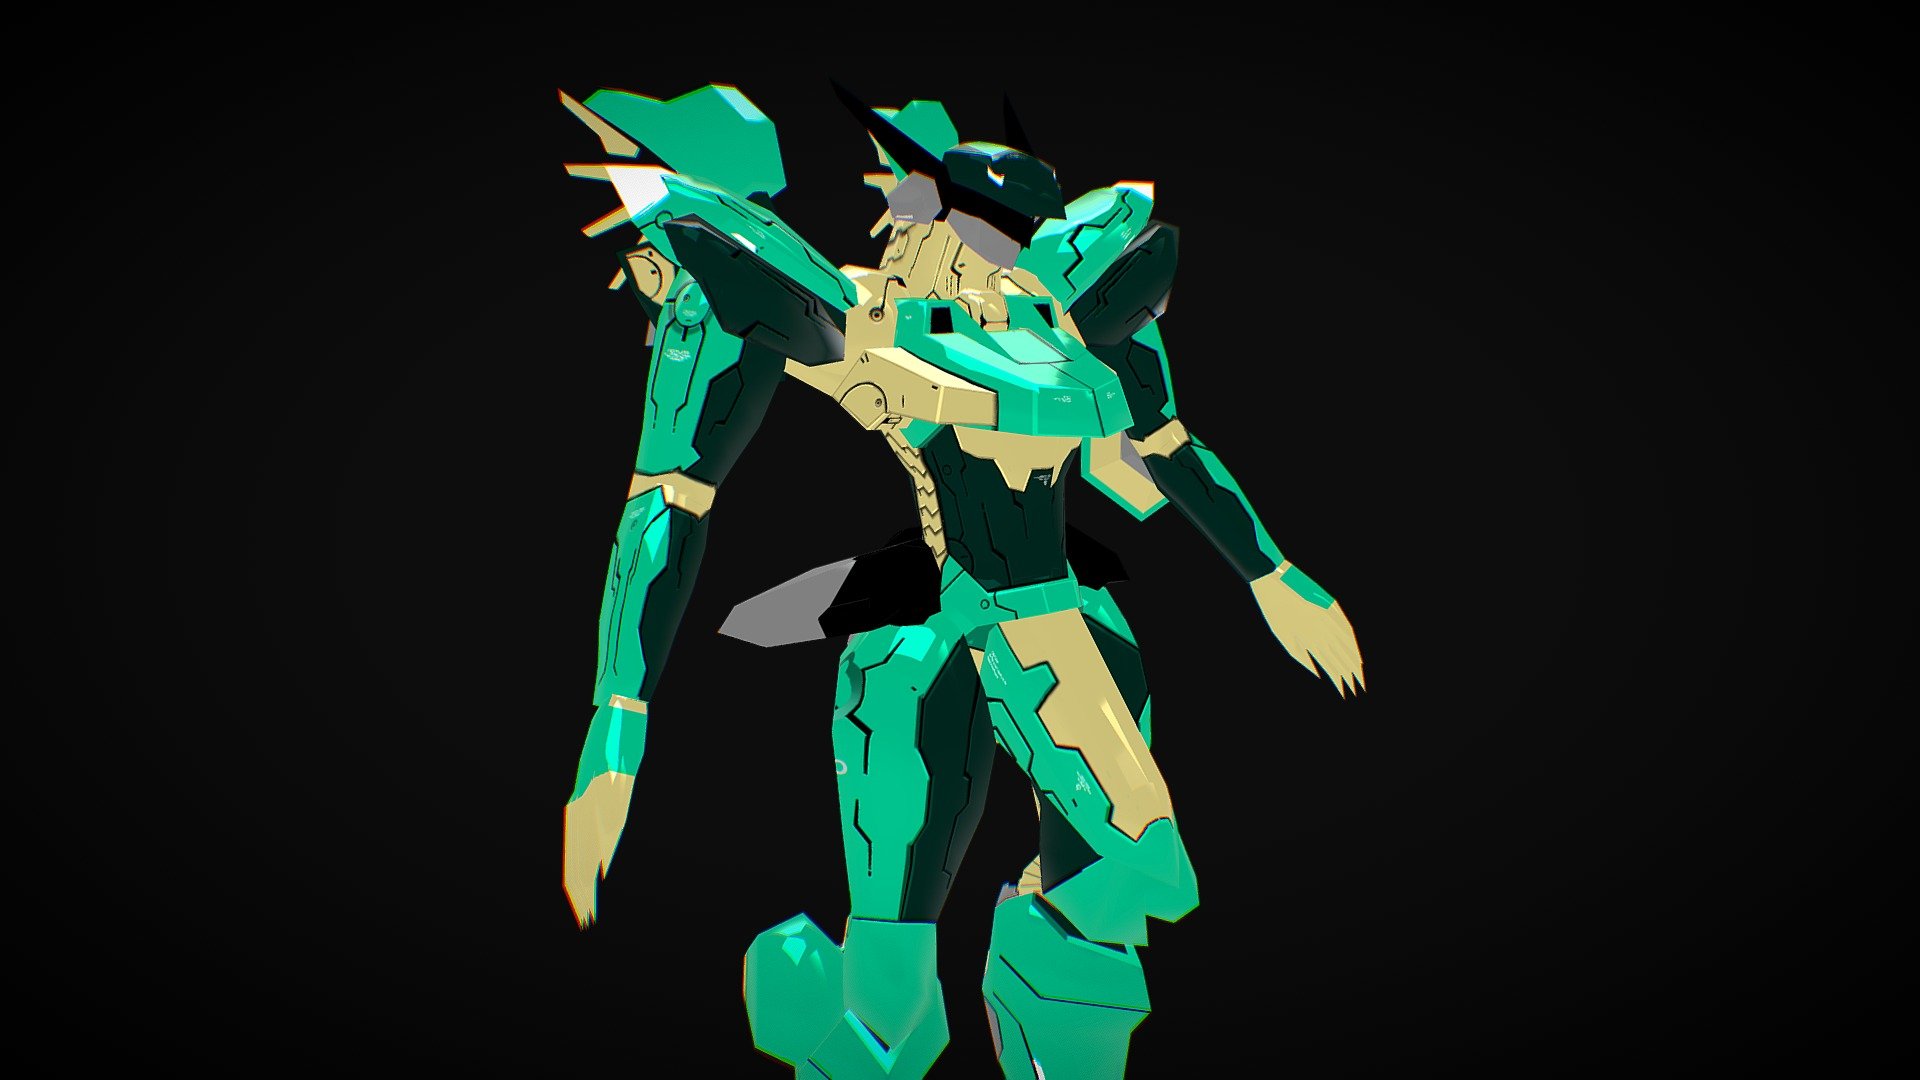 This is my jehuty fanart based off the model from the game. It is is currently a work in progress 3d model